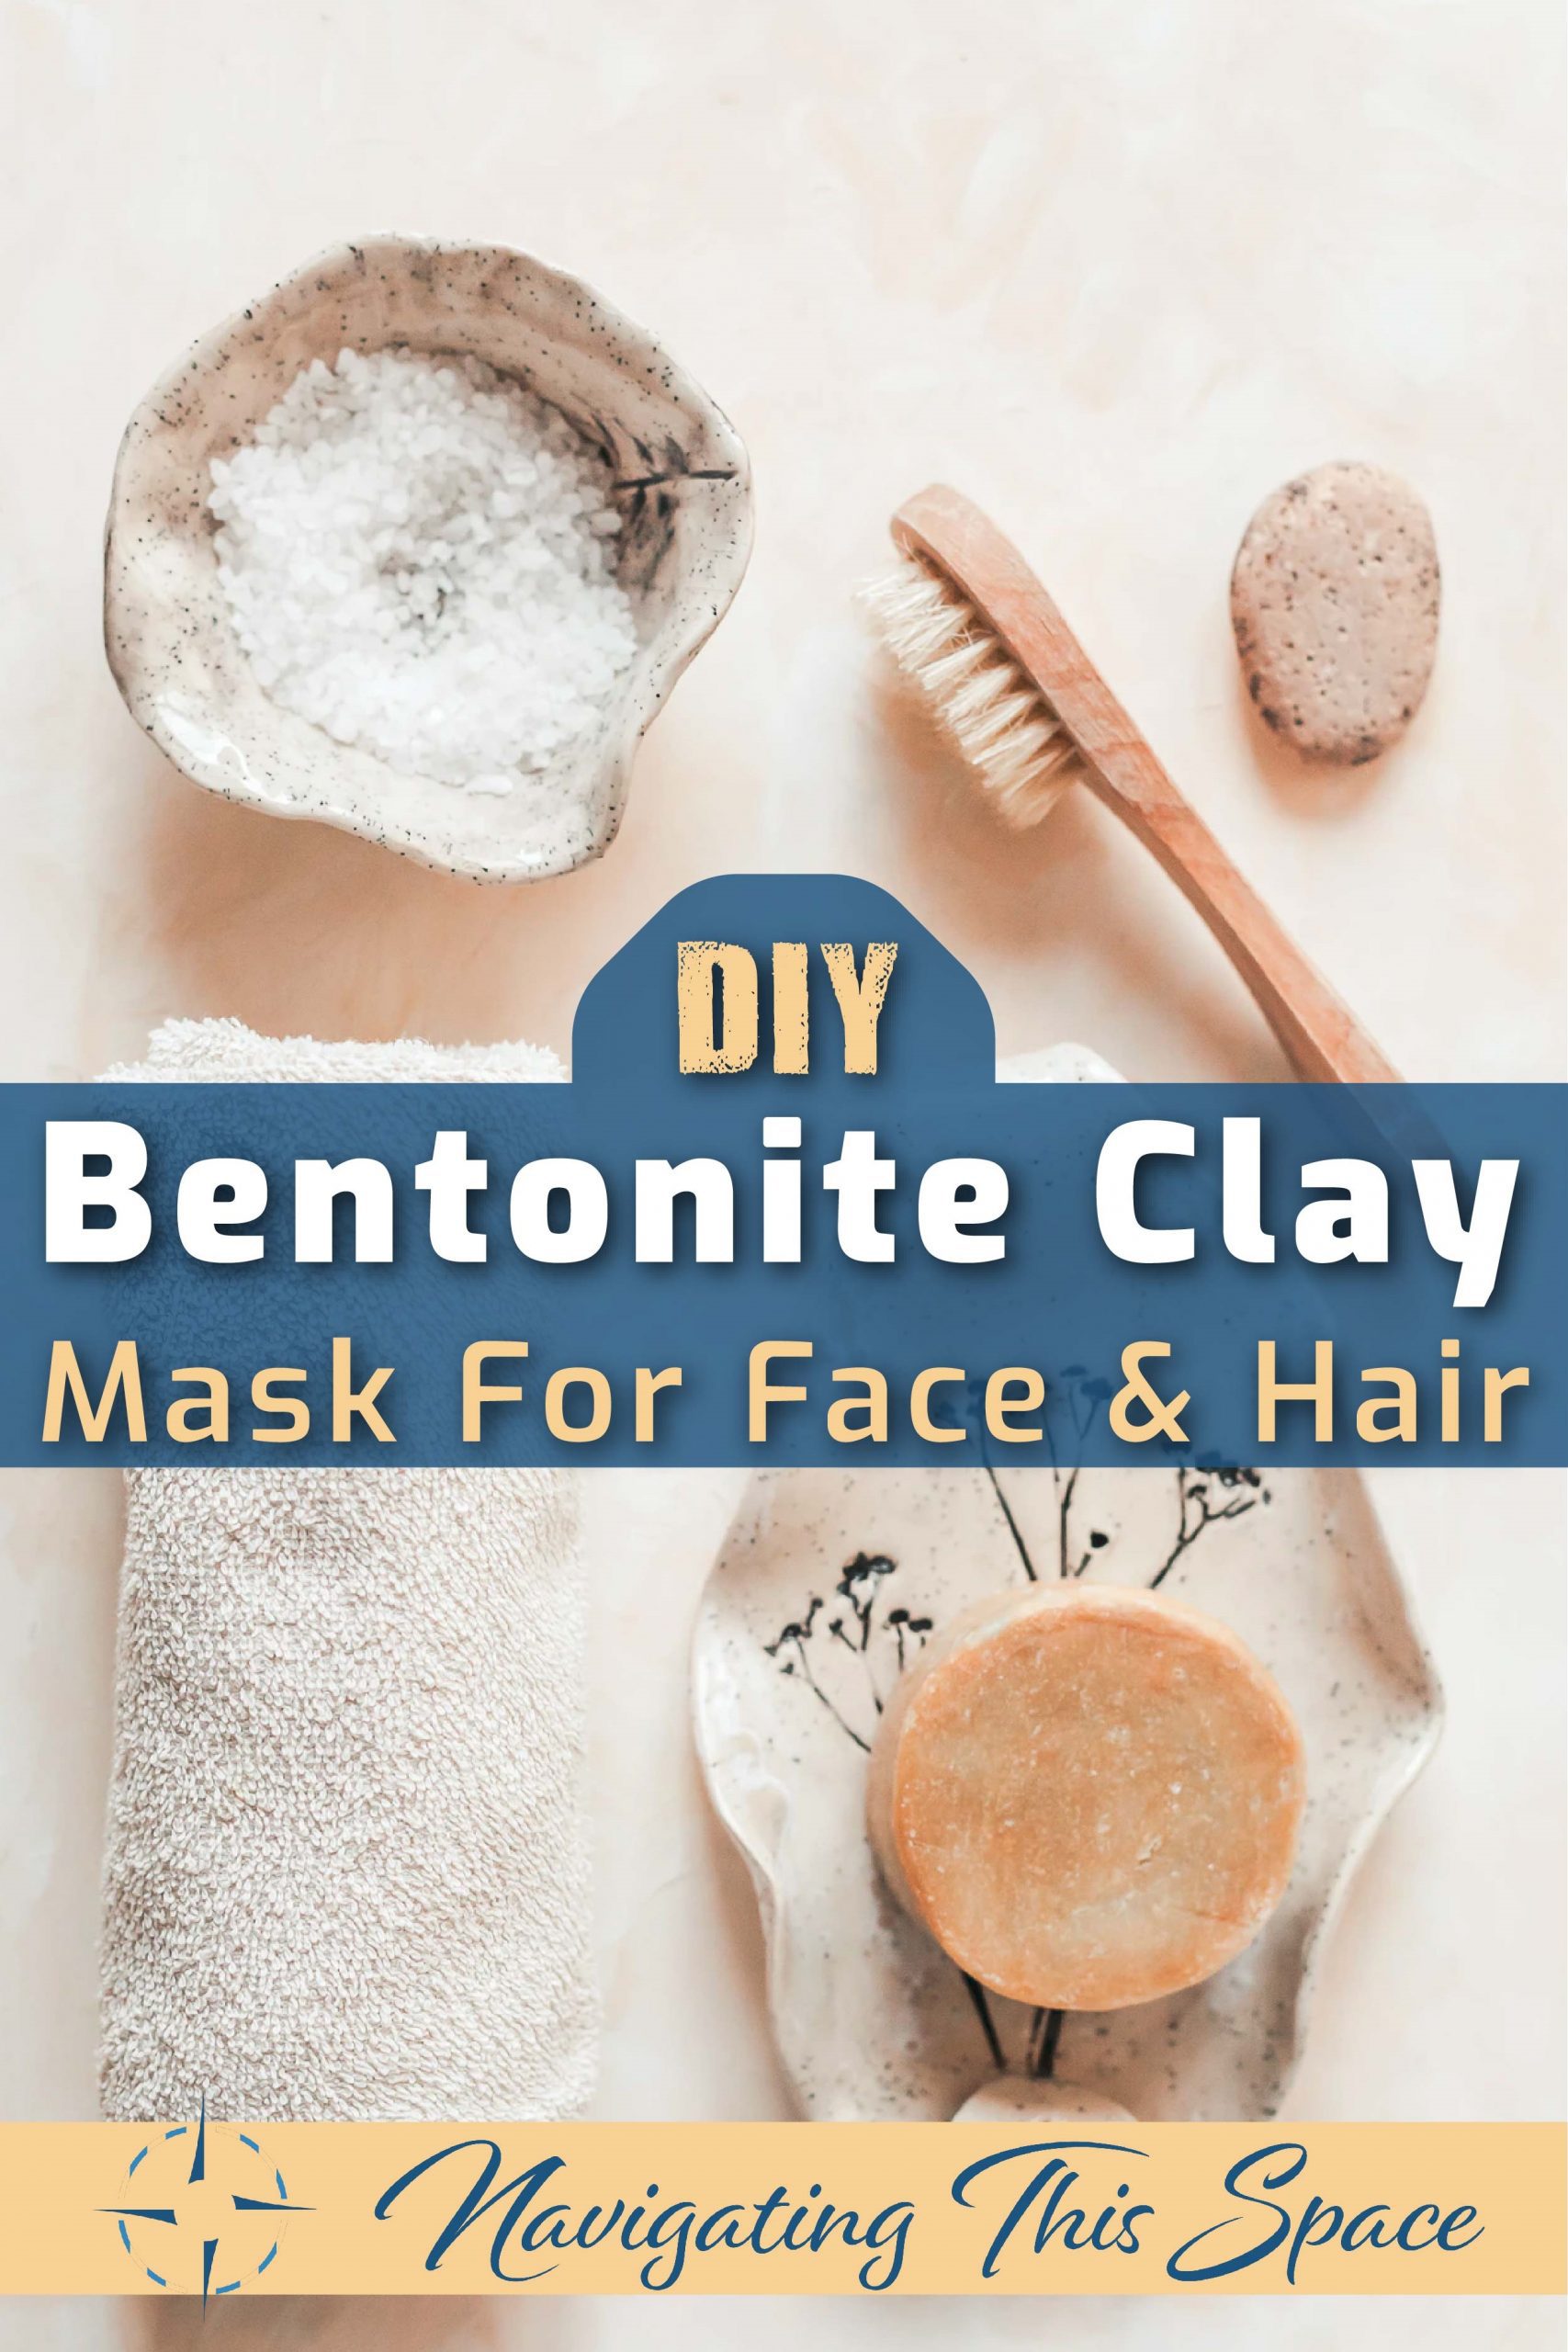 The Best DIY Bentonite Clay Mask For Face and Hair - Navigating This Space